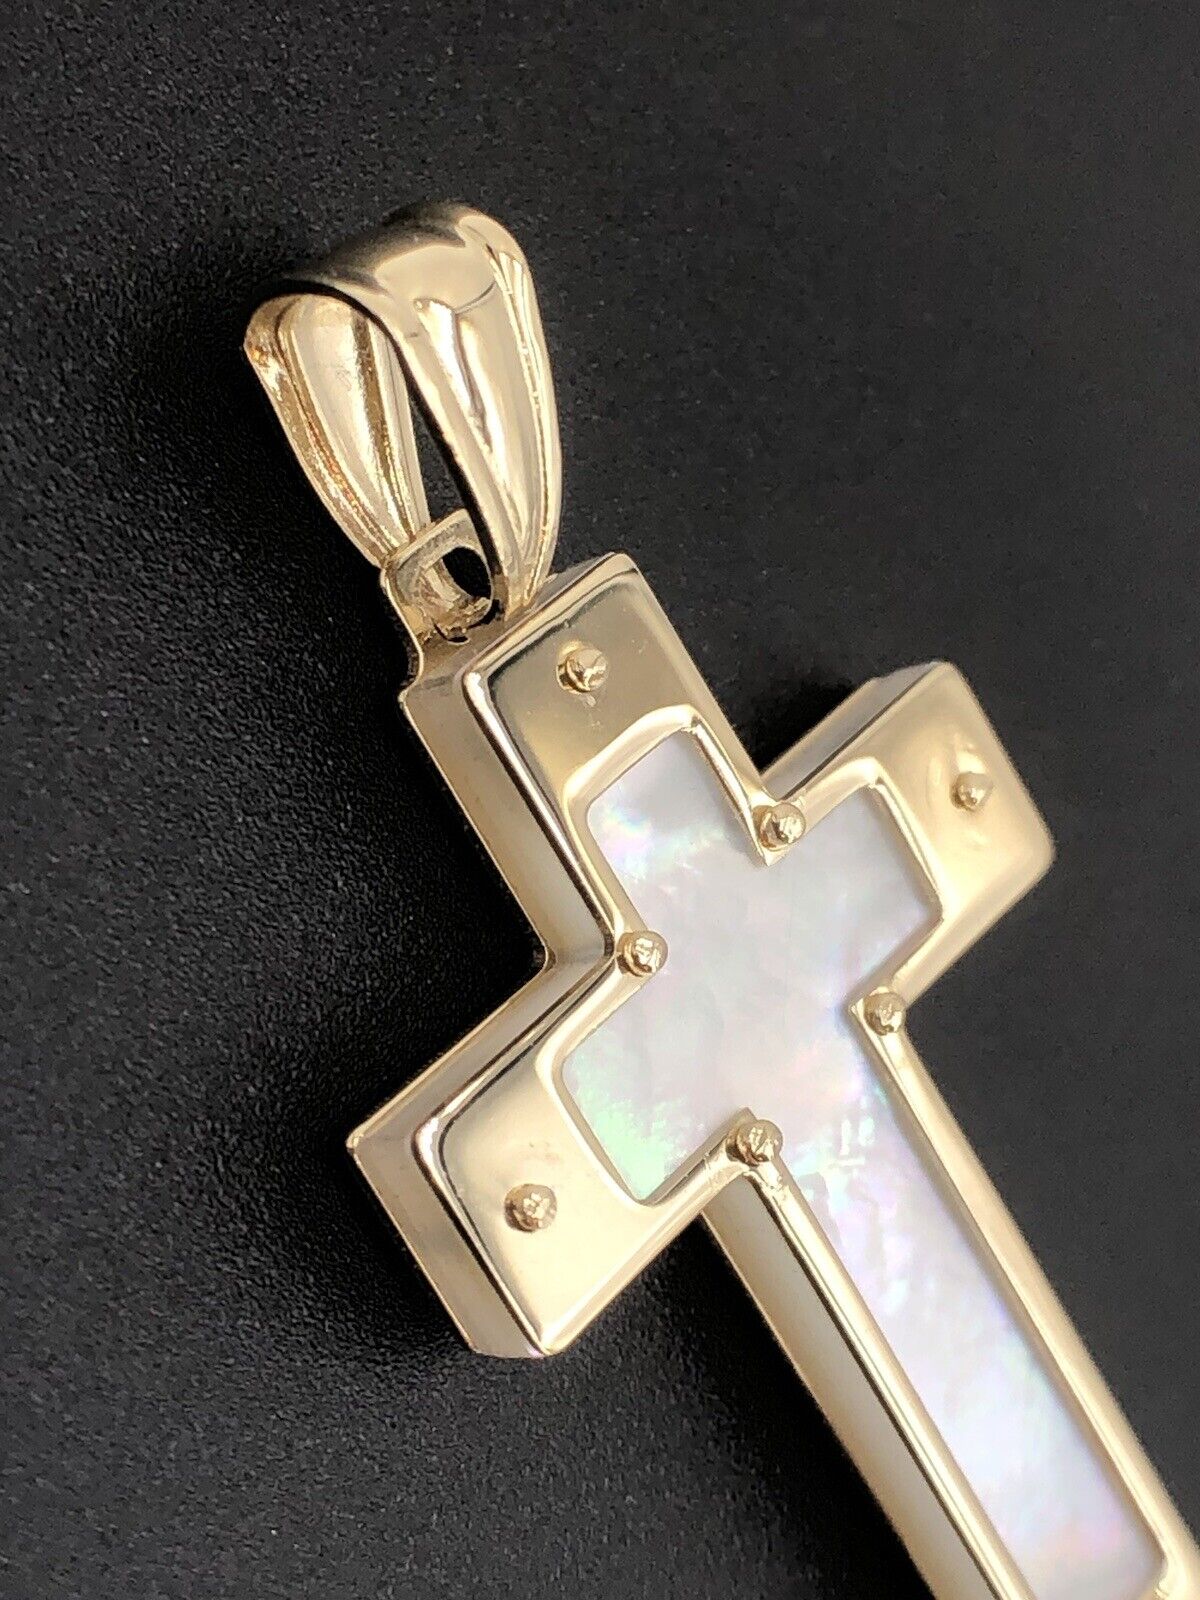 Solid 14K Yellow Gold Mother of Pearl Cross Pendant, 2-Sided, New